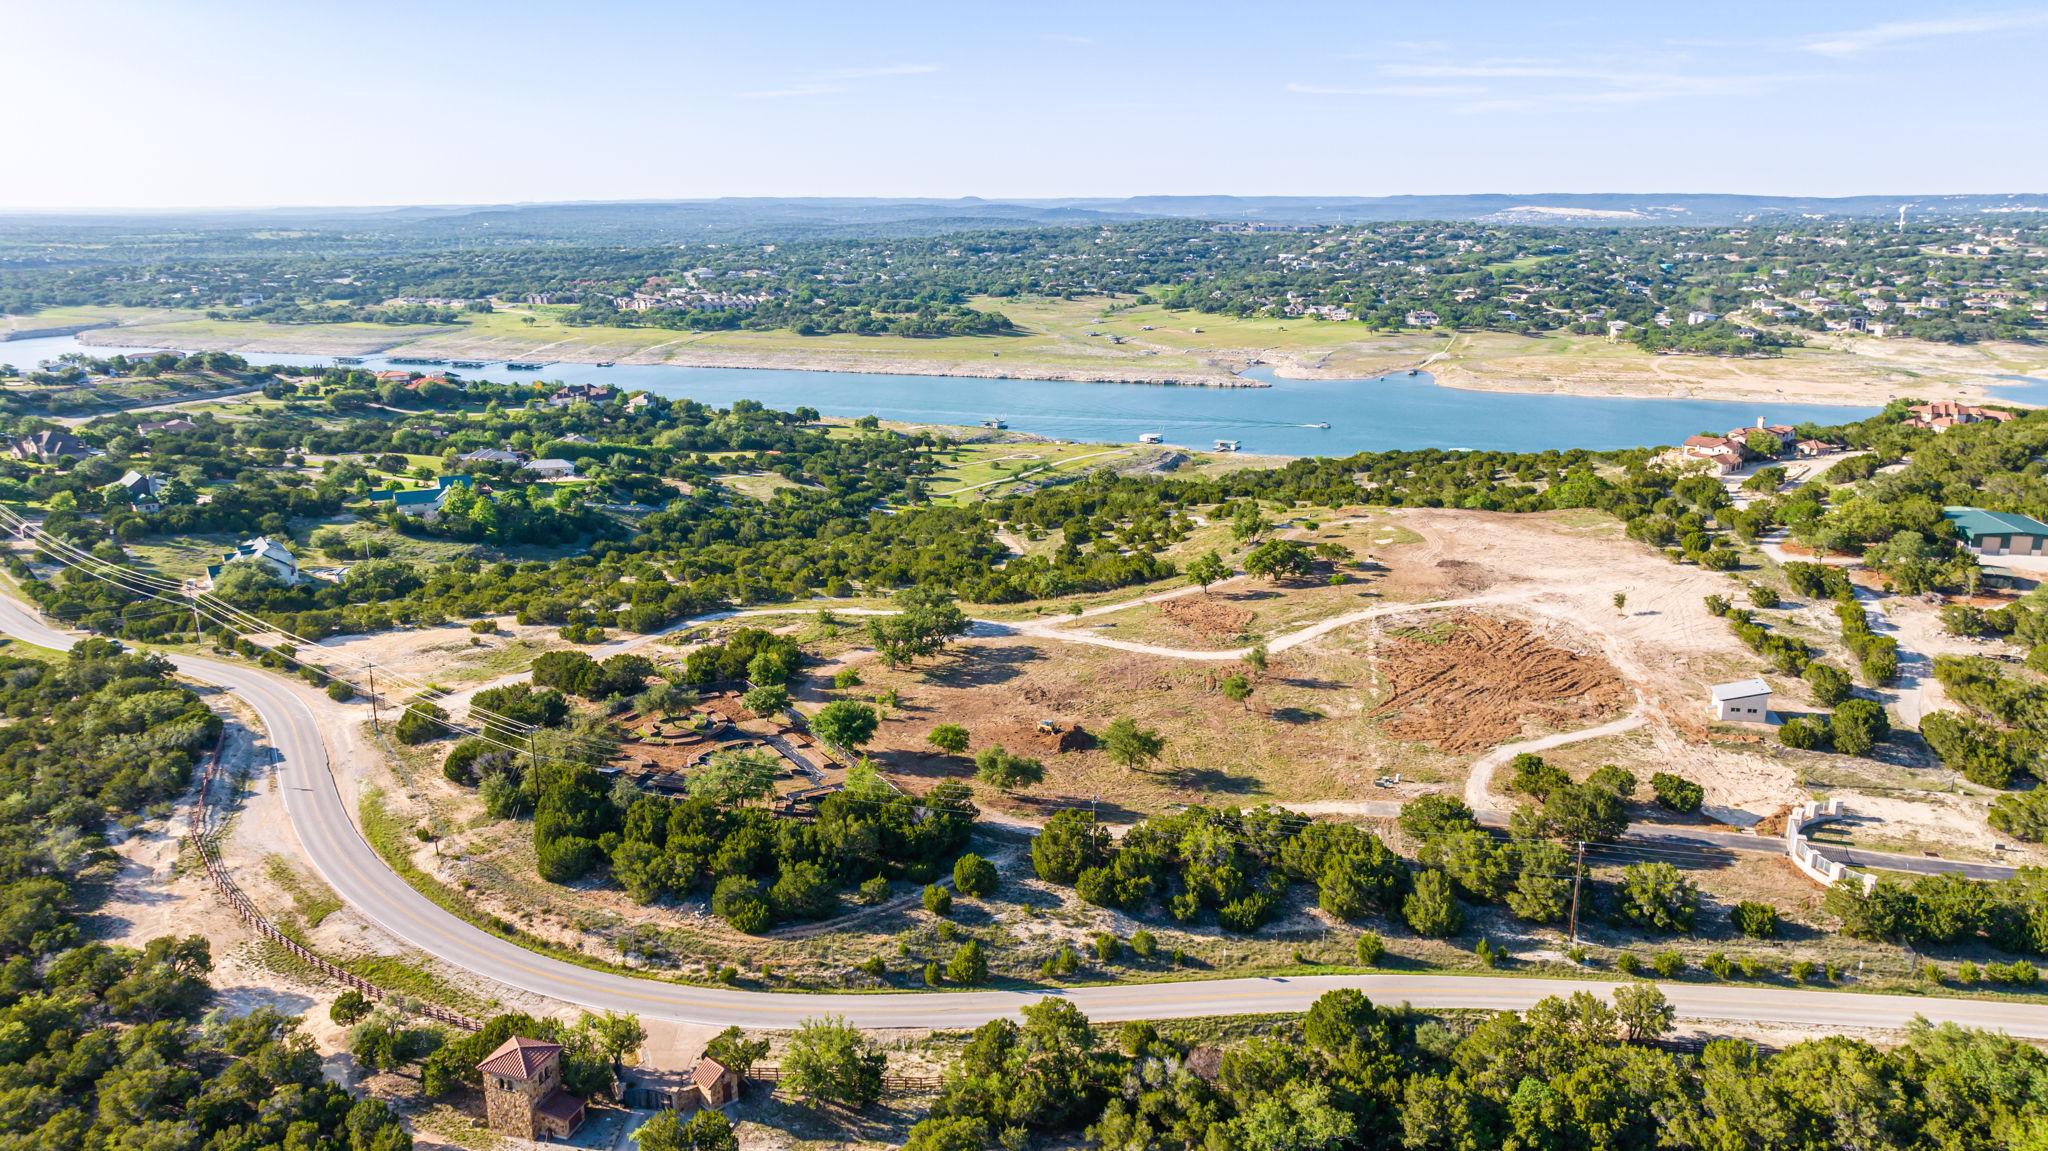 The 23.85 acres are on  your right.  This view is looking towards Briarcliff.